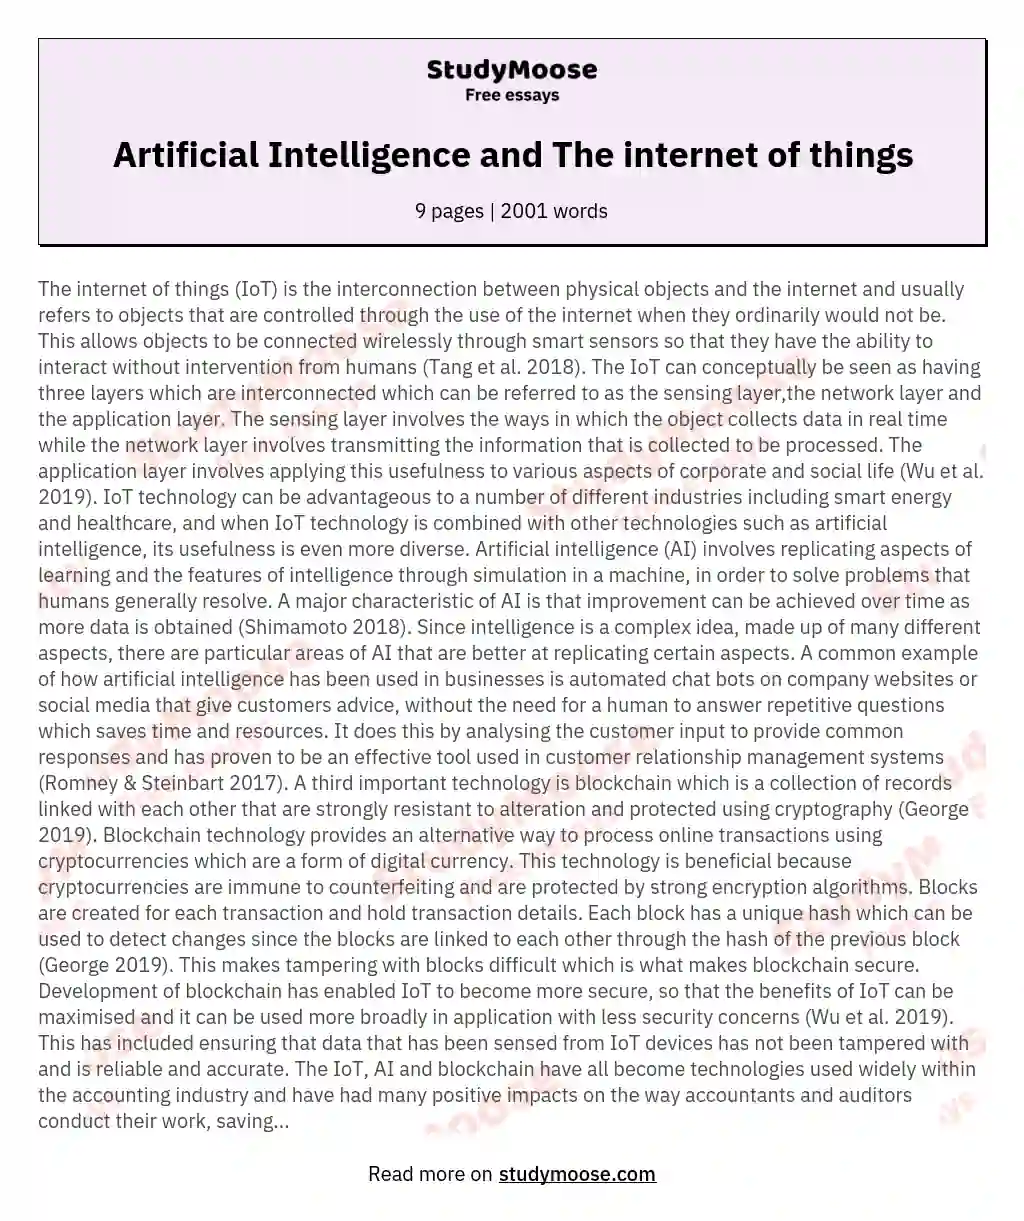 Artificial Intelligence and The internet of things essay